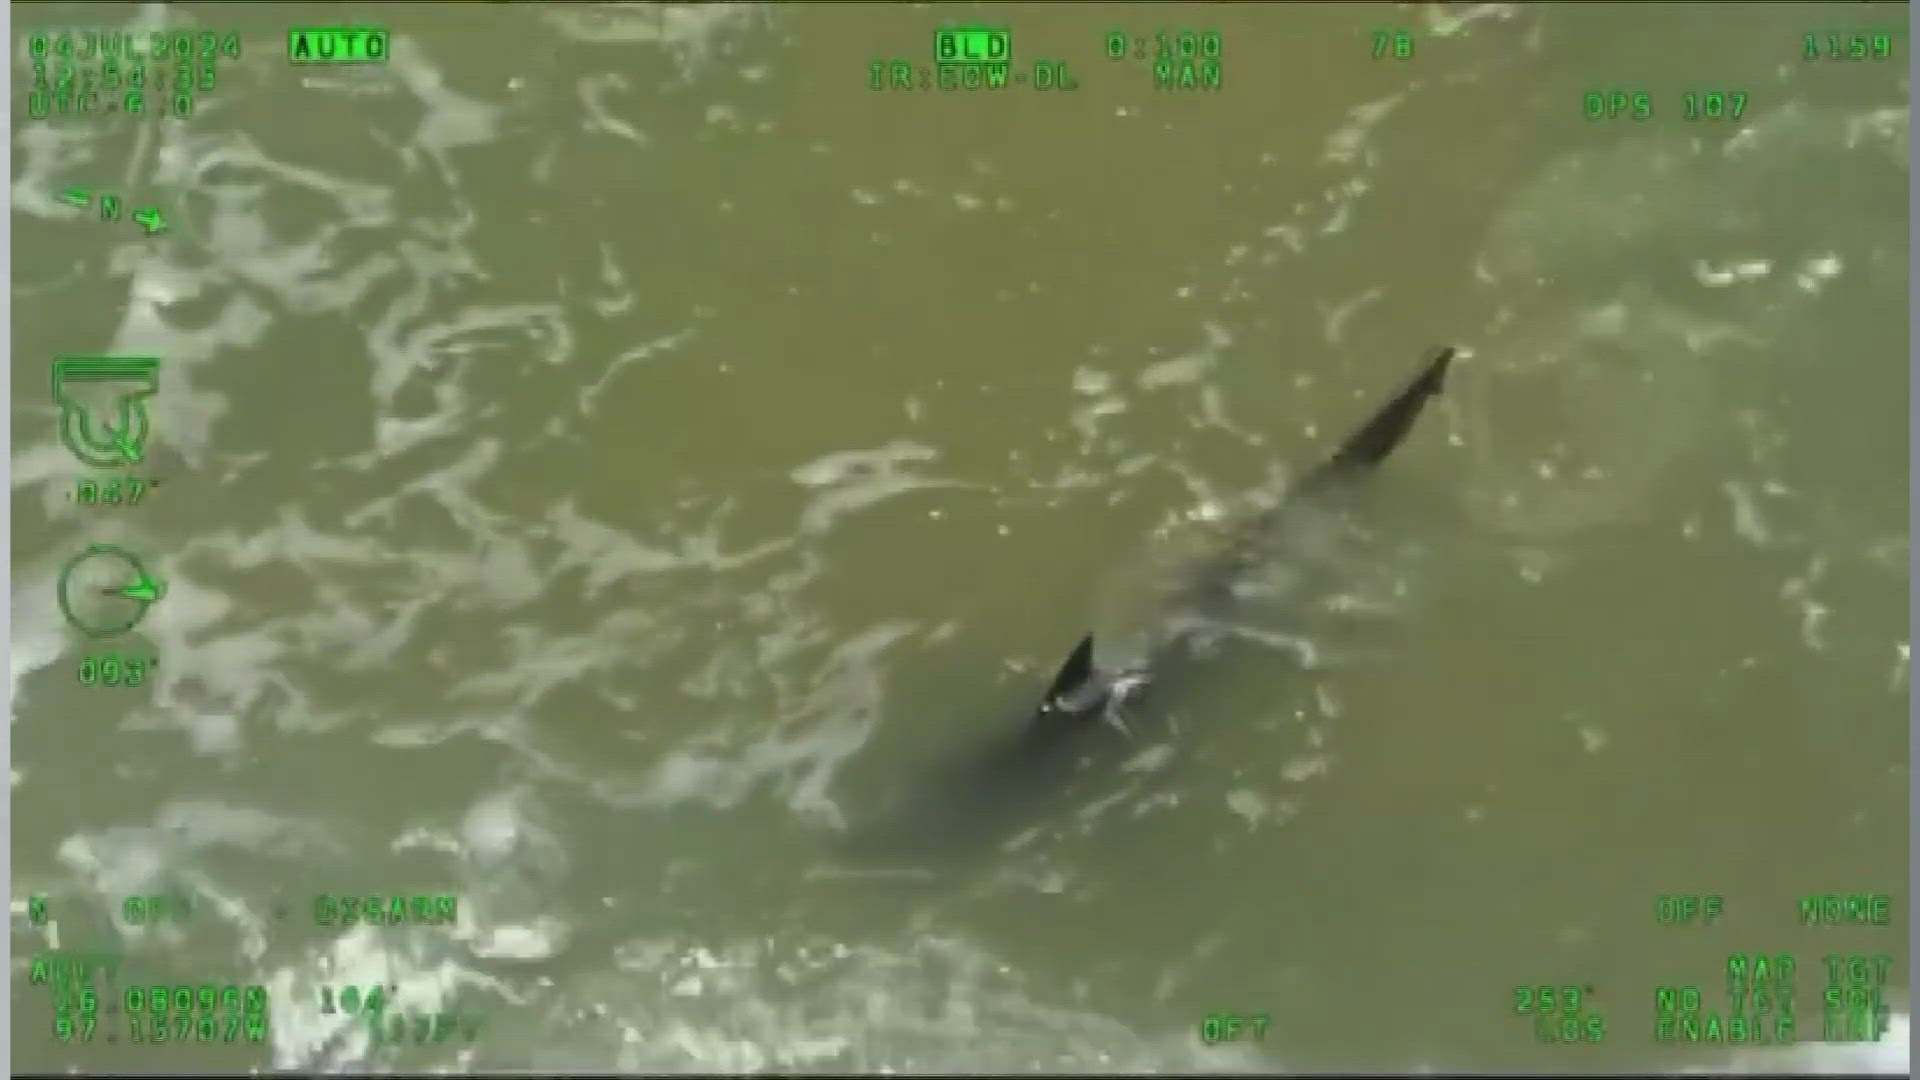 Officials said there is no plan to contain the shark at this time.